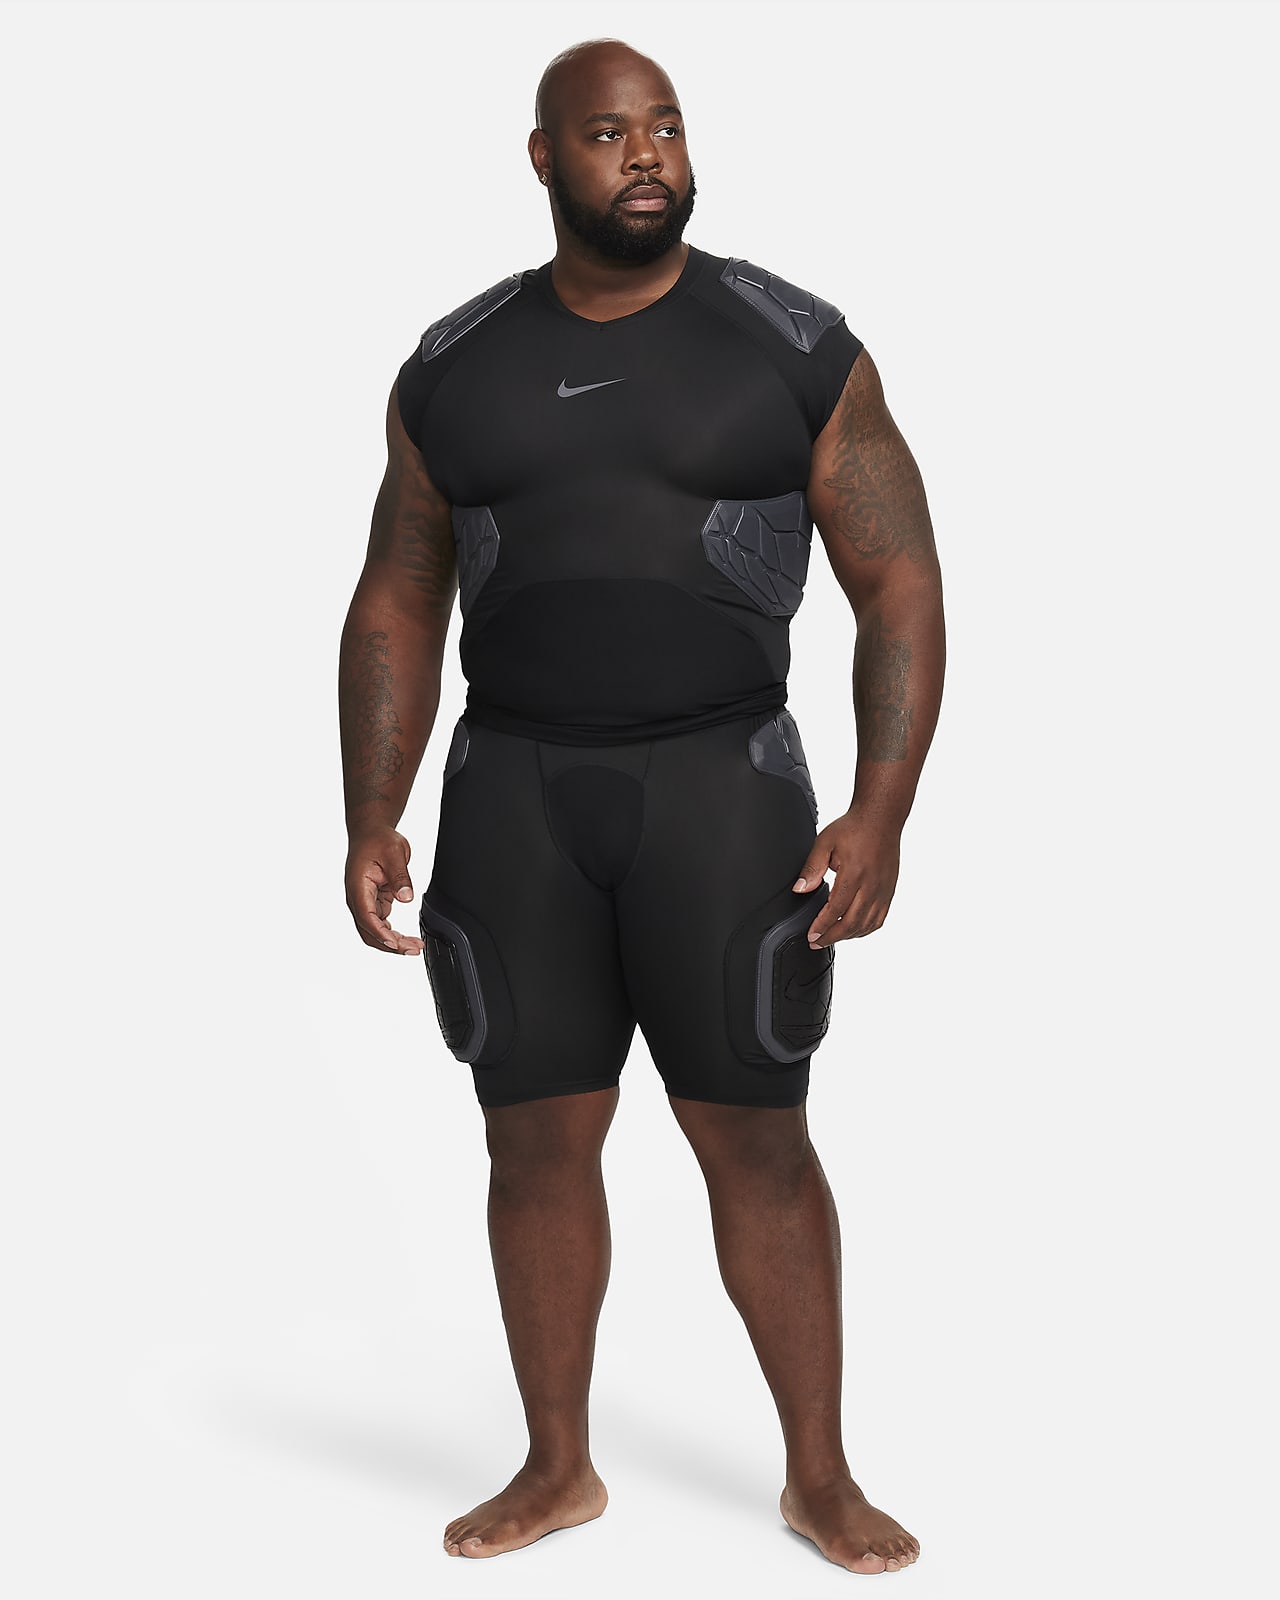 New Nike Pro Combat Hyperstrong Padded Football Compression Tights